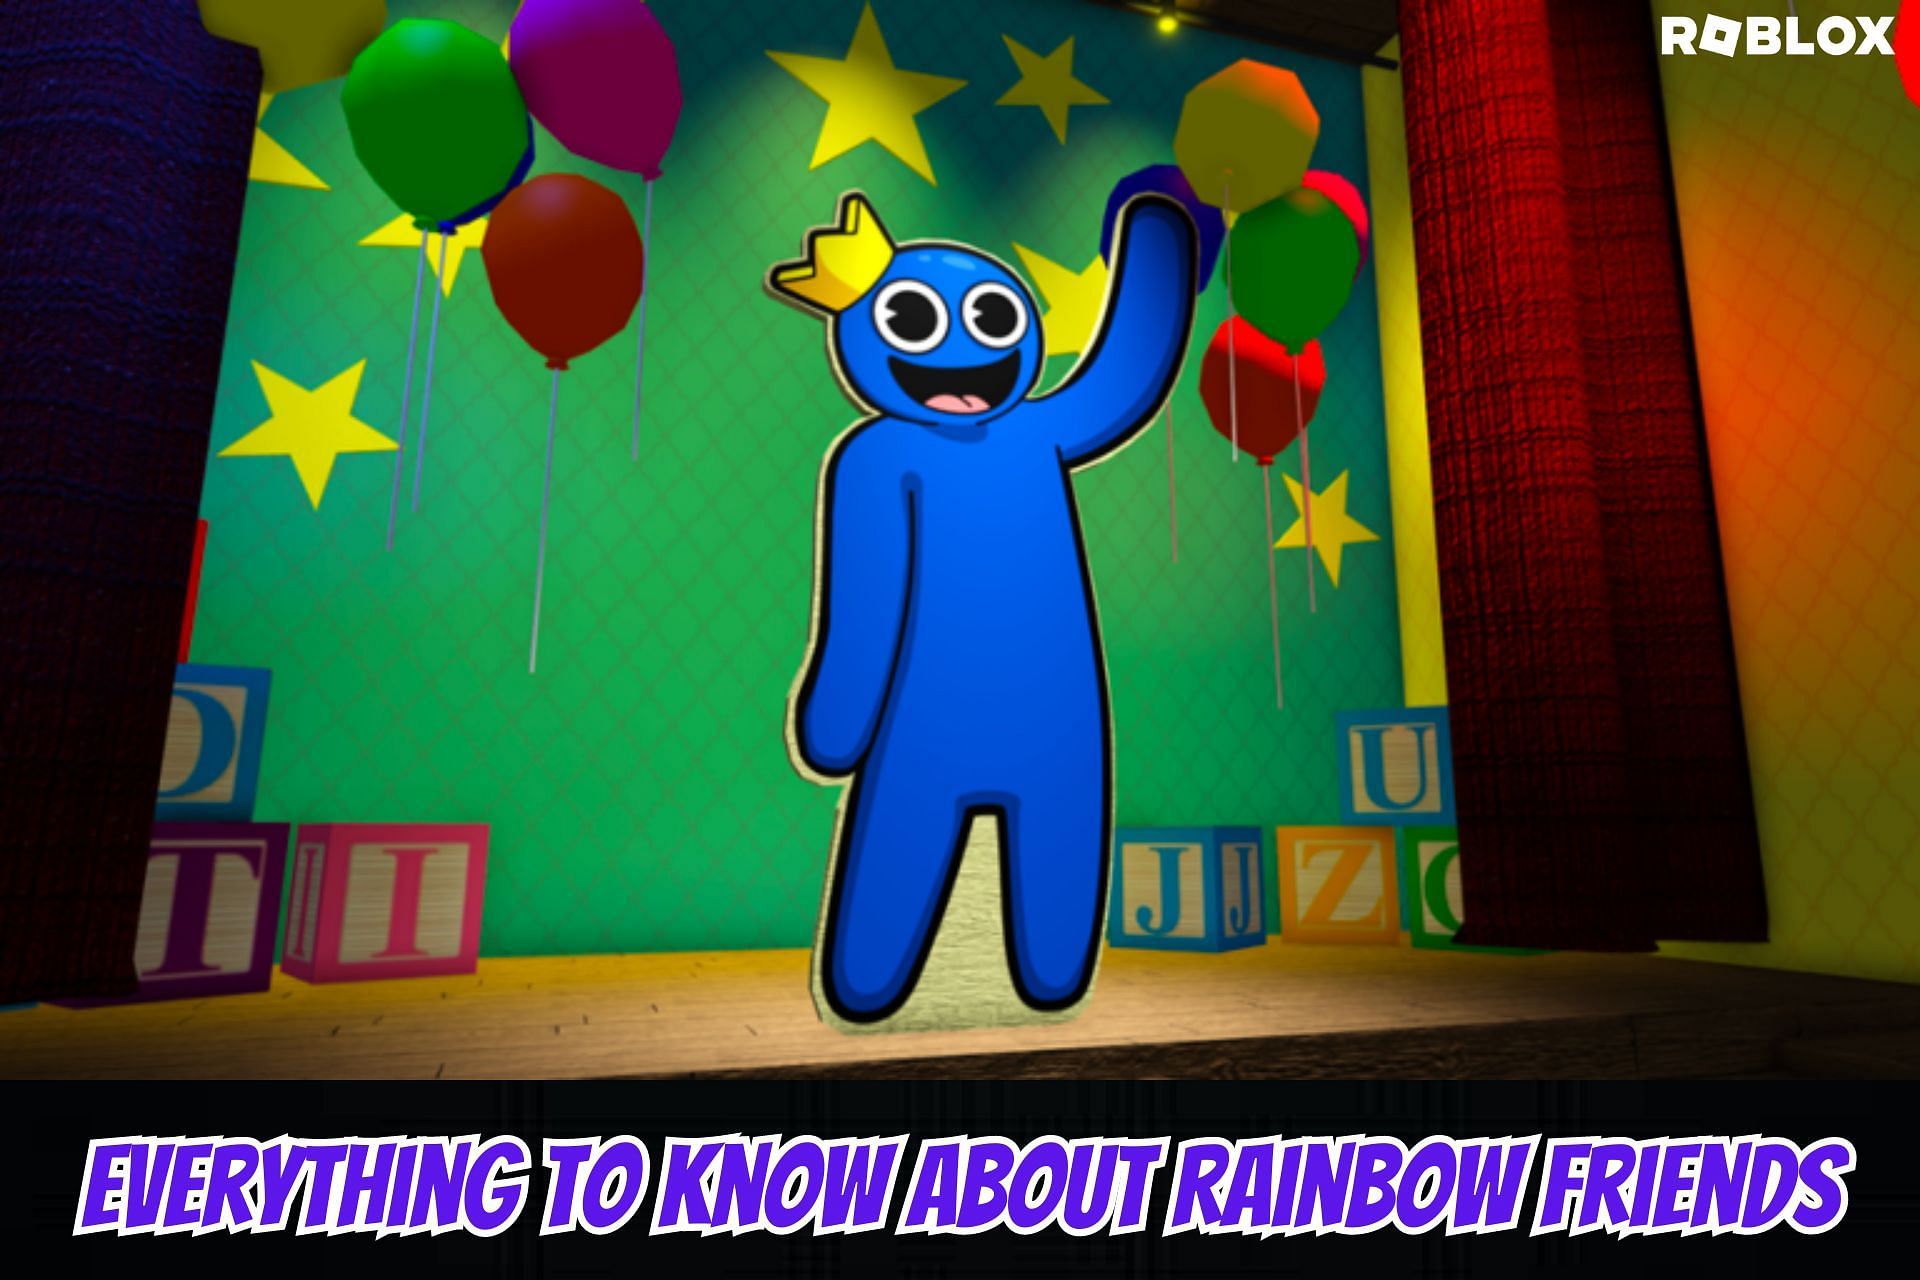 Everything a new player needs to know about Roblox Rainbow Friends